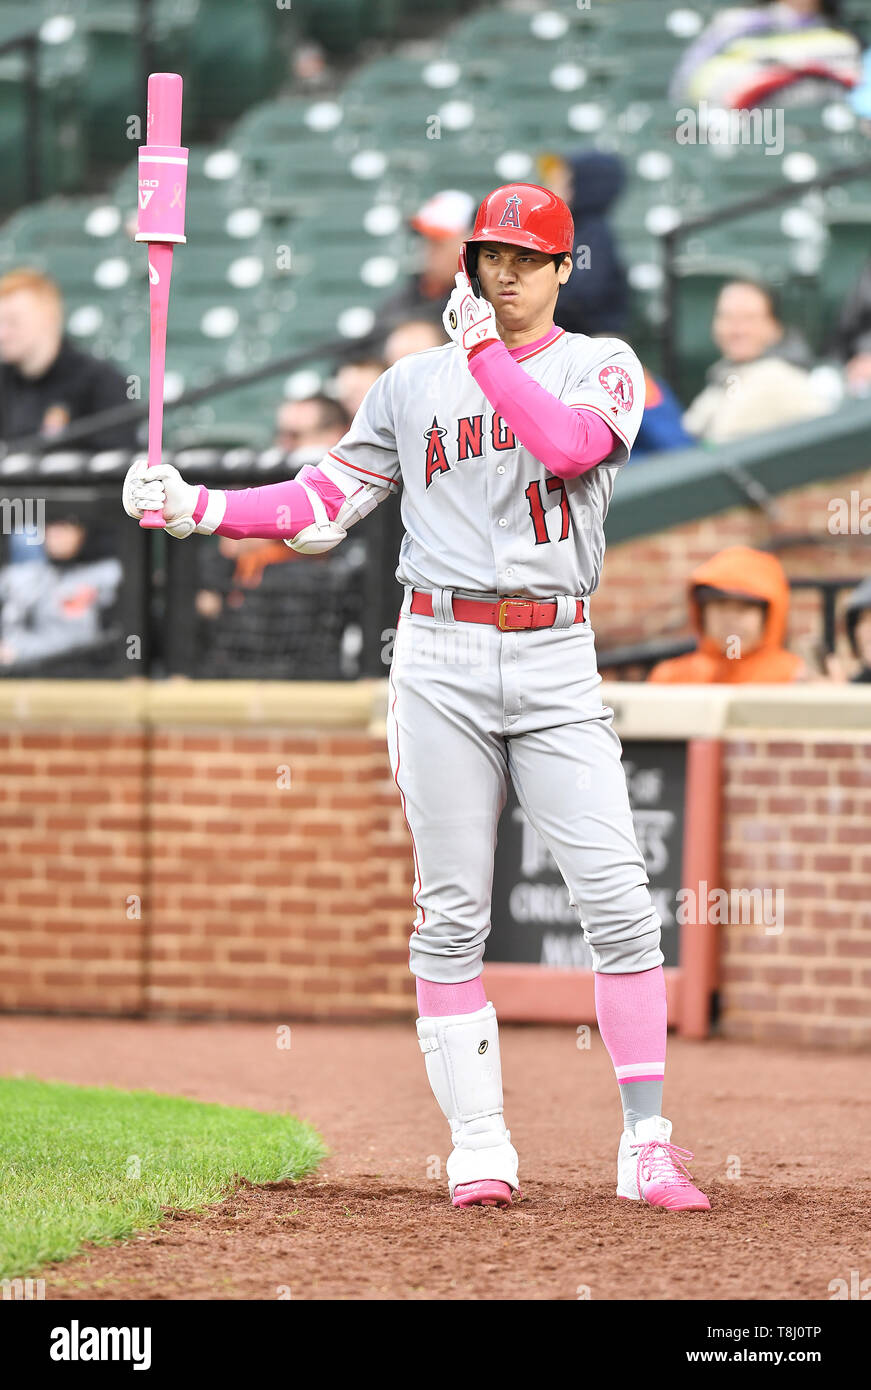 Los Angeles Angels' Shohei Ohtani warms up in the on-deck circle in the ninth inning during the Major League Baseball game against the Baltimore Orioles at Oriole Park at Camden Yards in Baltimore, Maryland, United States, May 12, 2019. Credit: AFLO/Alamy Live News Stock Photo